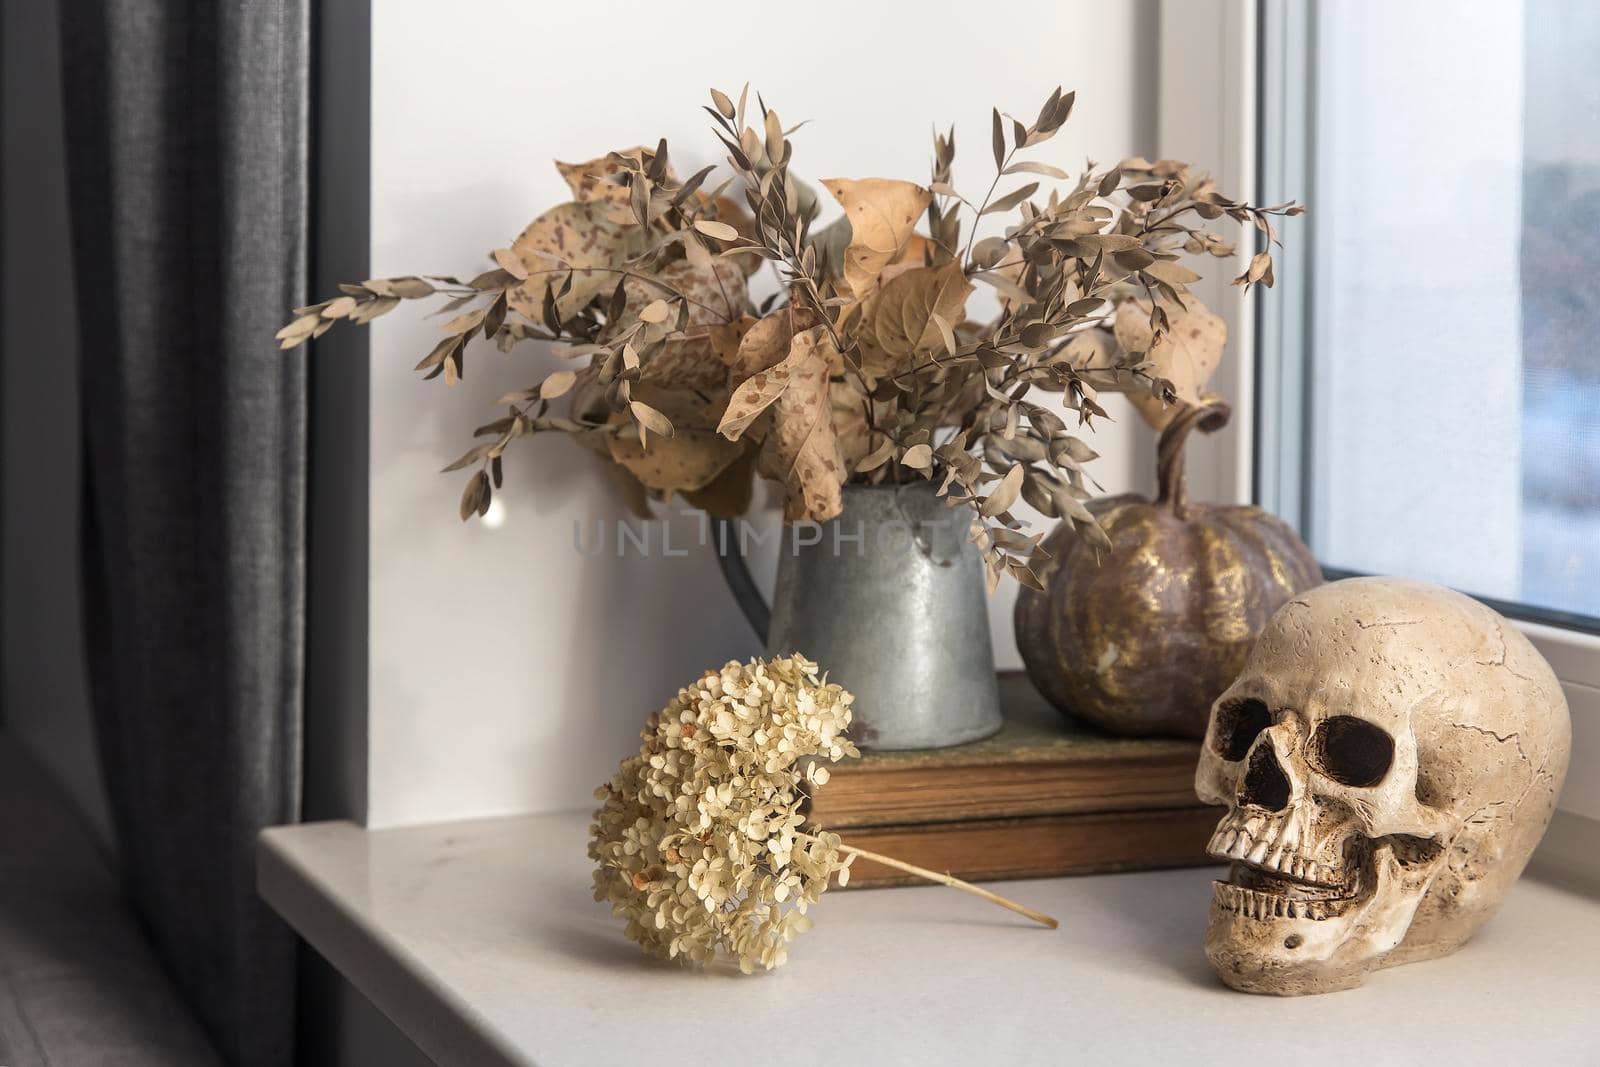 Bouquet of dried autumn leaves in a zinc jug, plastic skull, artificial gilded pumpkin, vintage books decorate the window for Halloween by elenarostunova